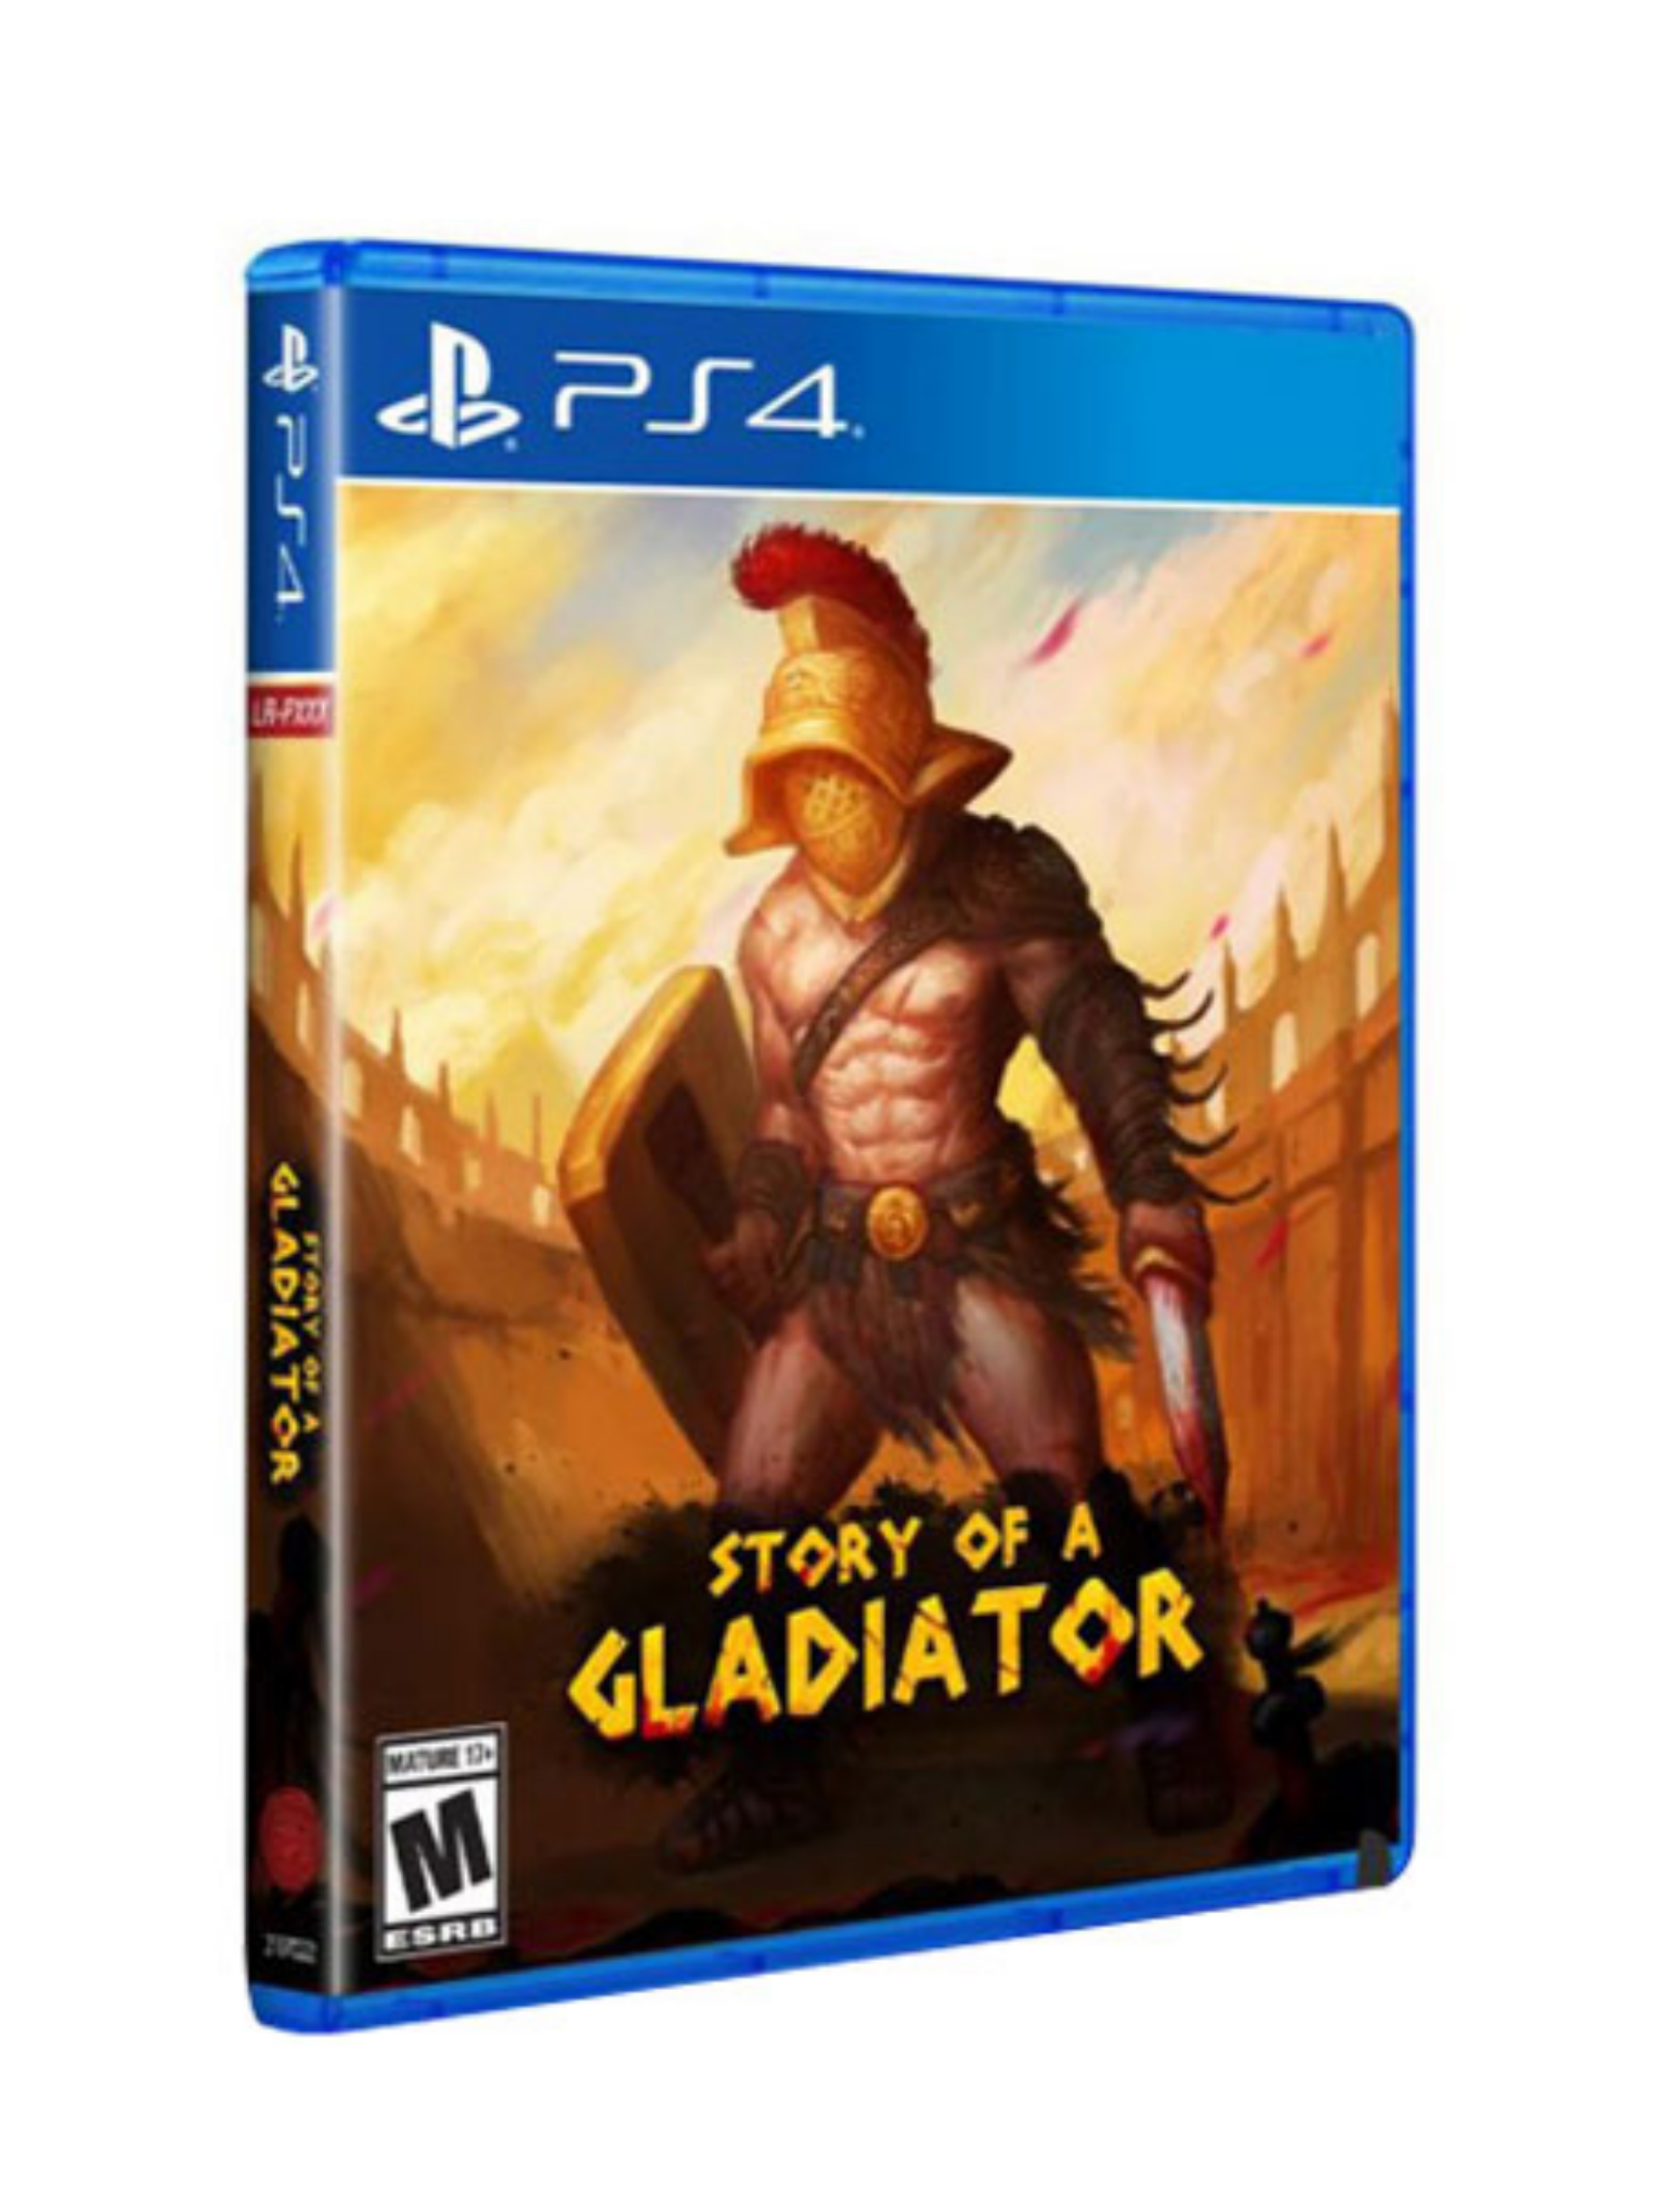 Story of a Gladiator PS4 US Limited Run